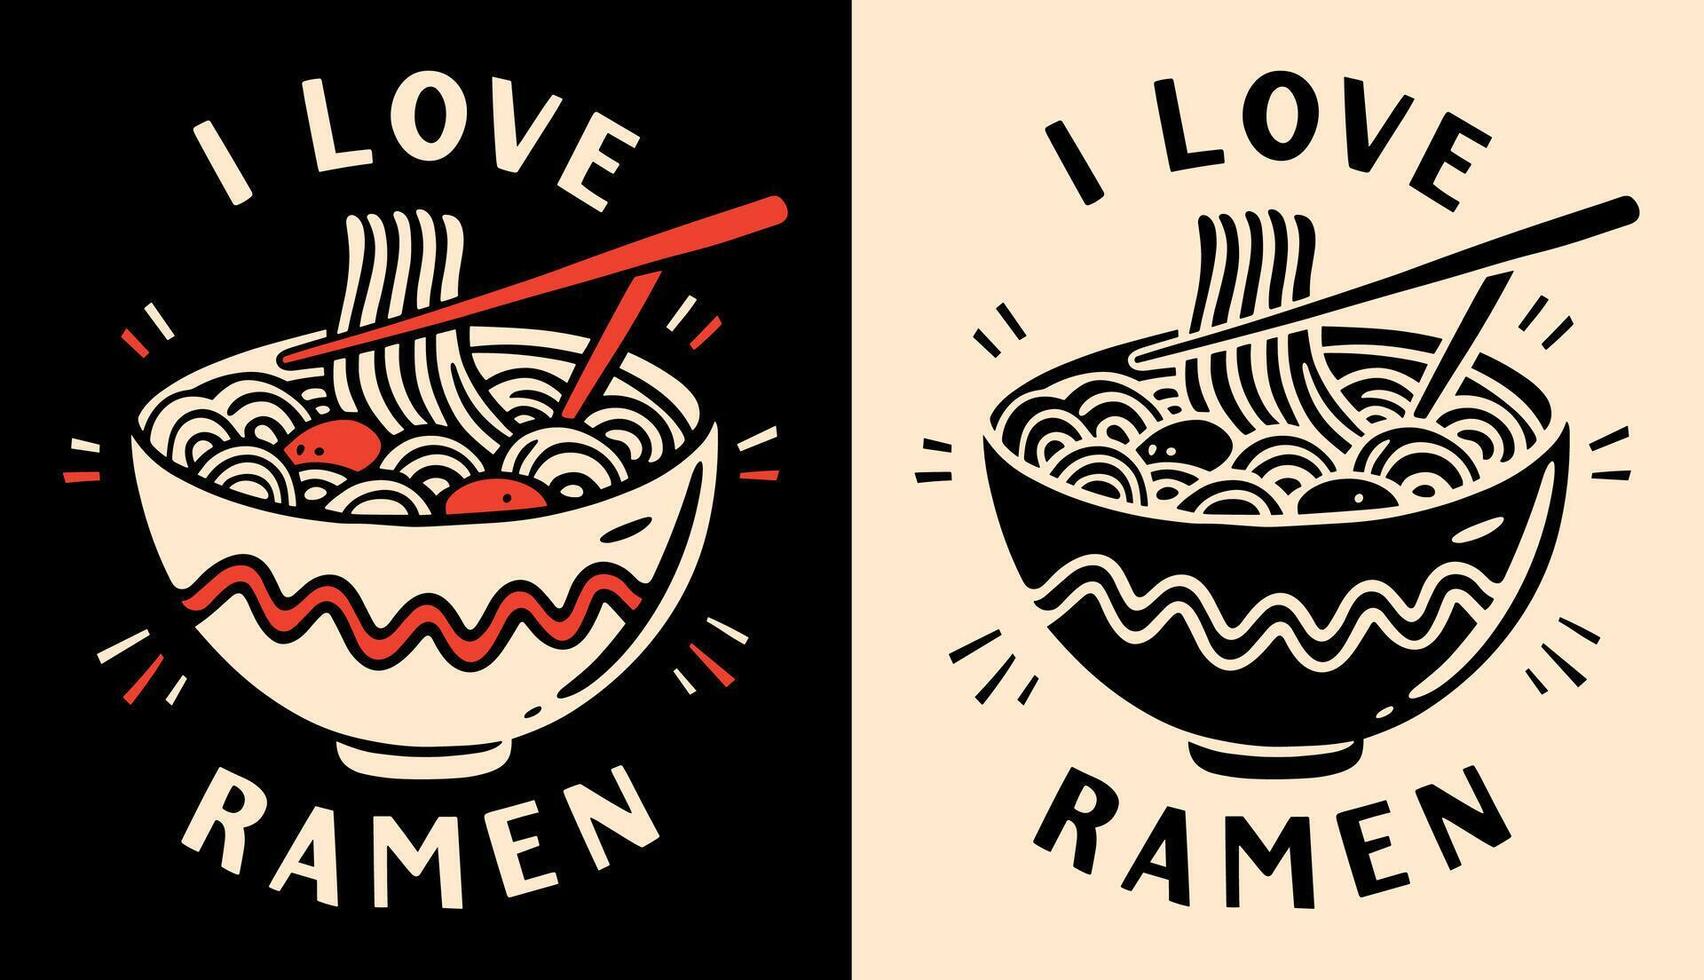 I love ramen lettering poster retro vintage black and red printable drawing cute ramen lover noodles bowl minimalist illustration Japanese food aesthetic for shirt design and print cut file vector